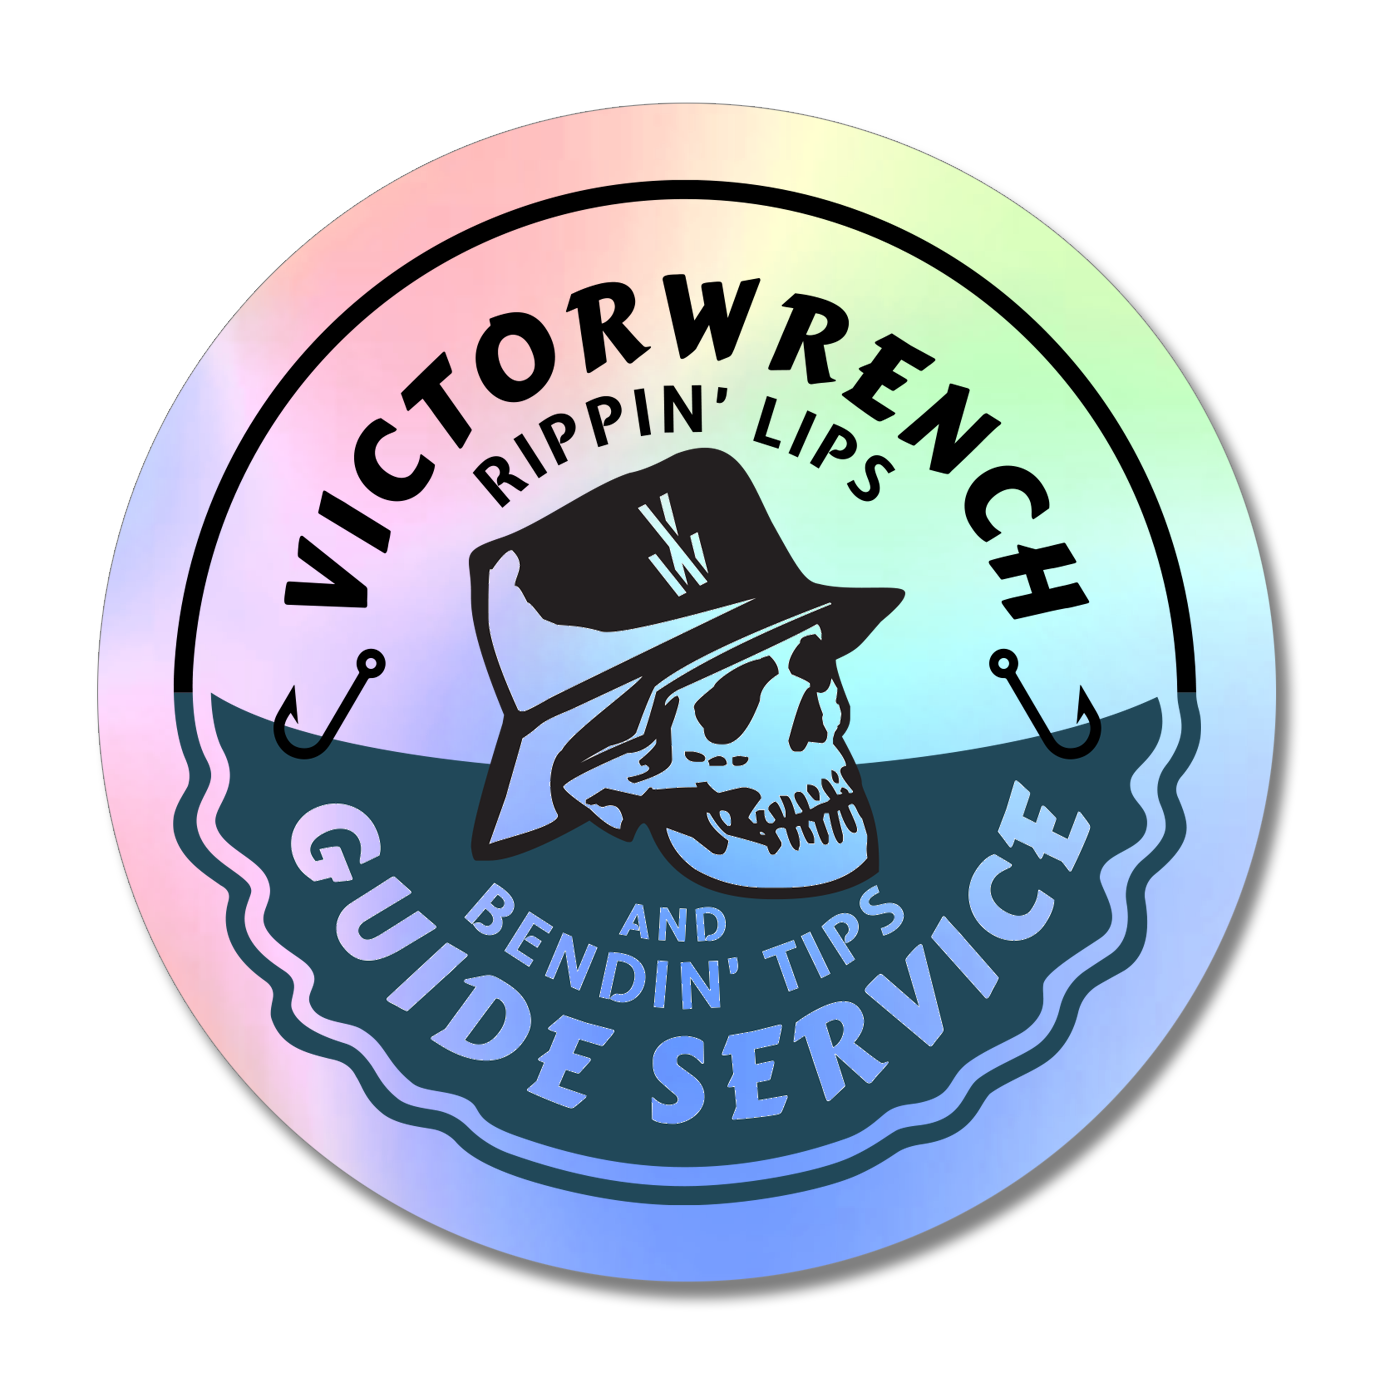 Guide Service Decal